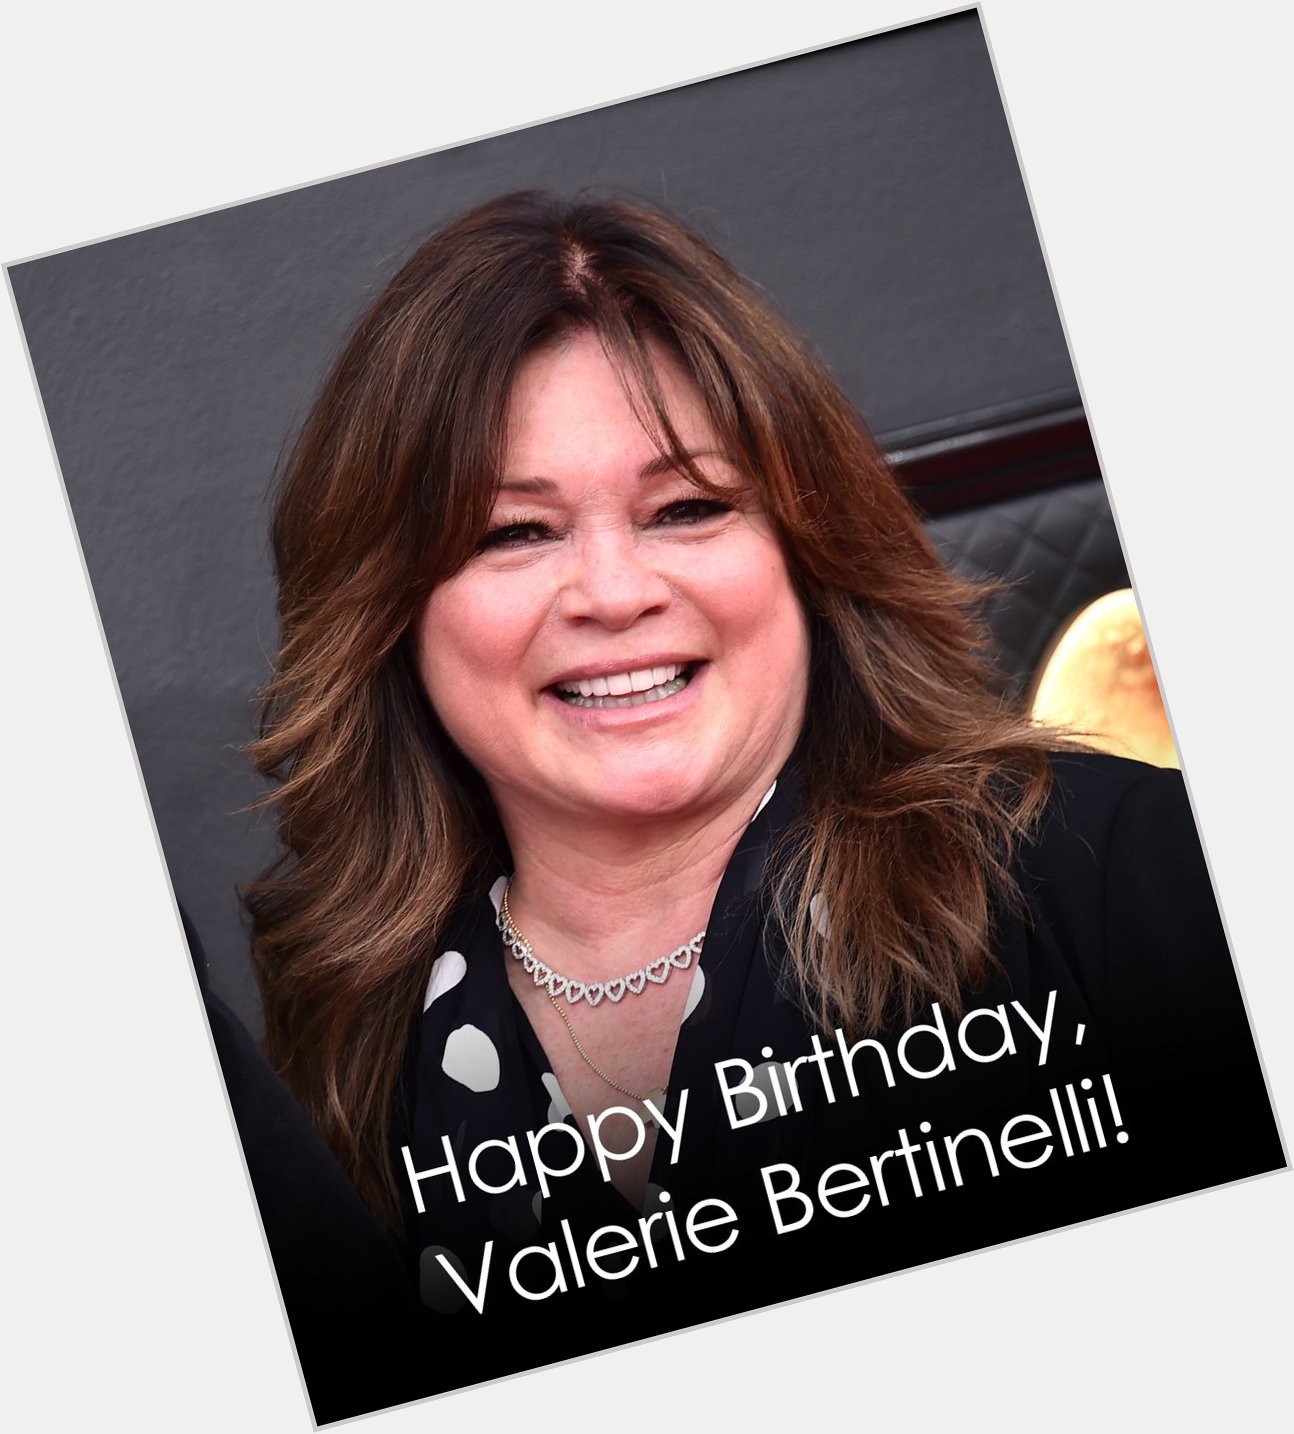 Happy birthday, Valerie Bertinelli! The actress is turning 62 today.  